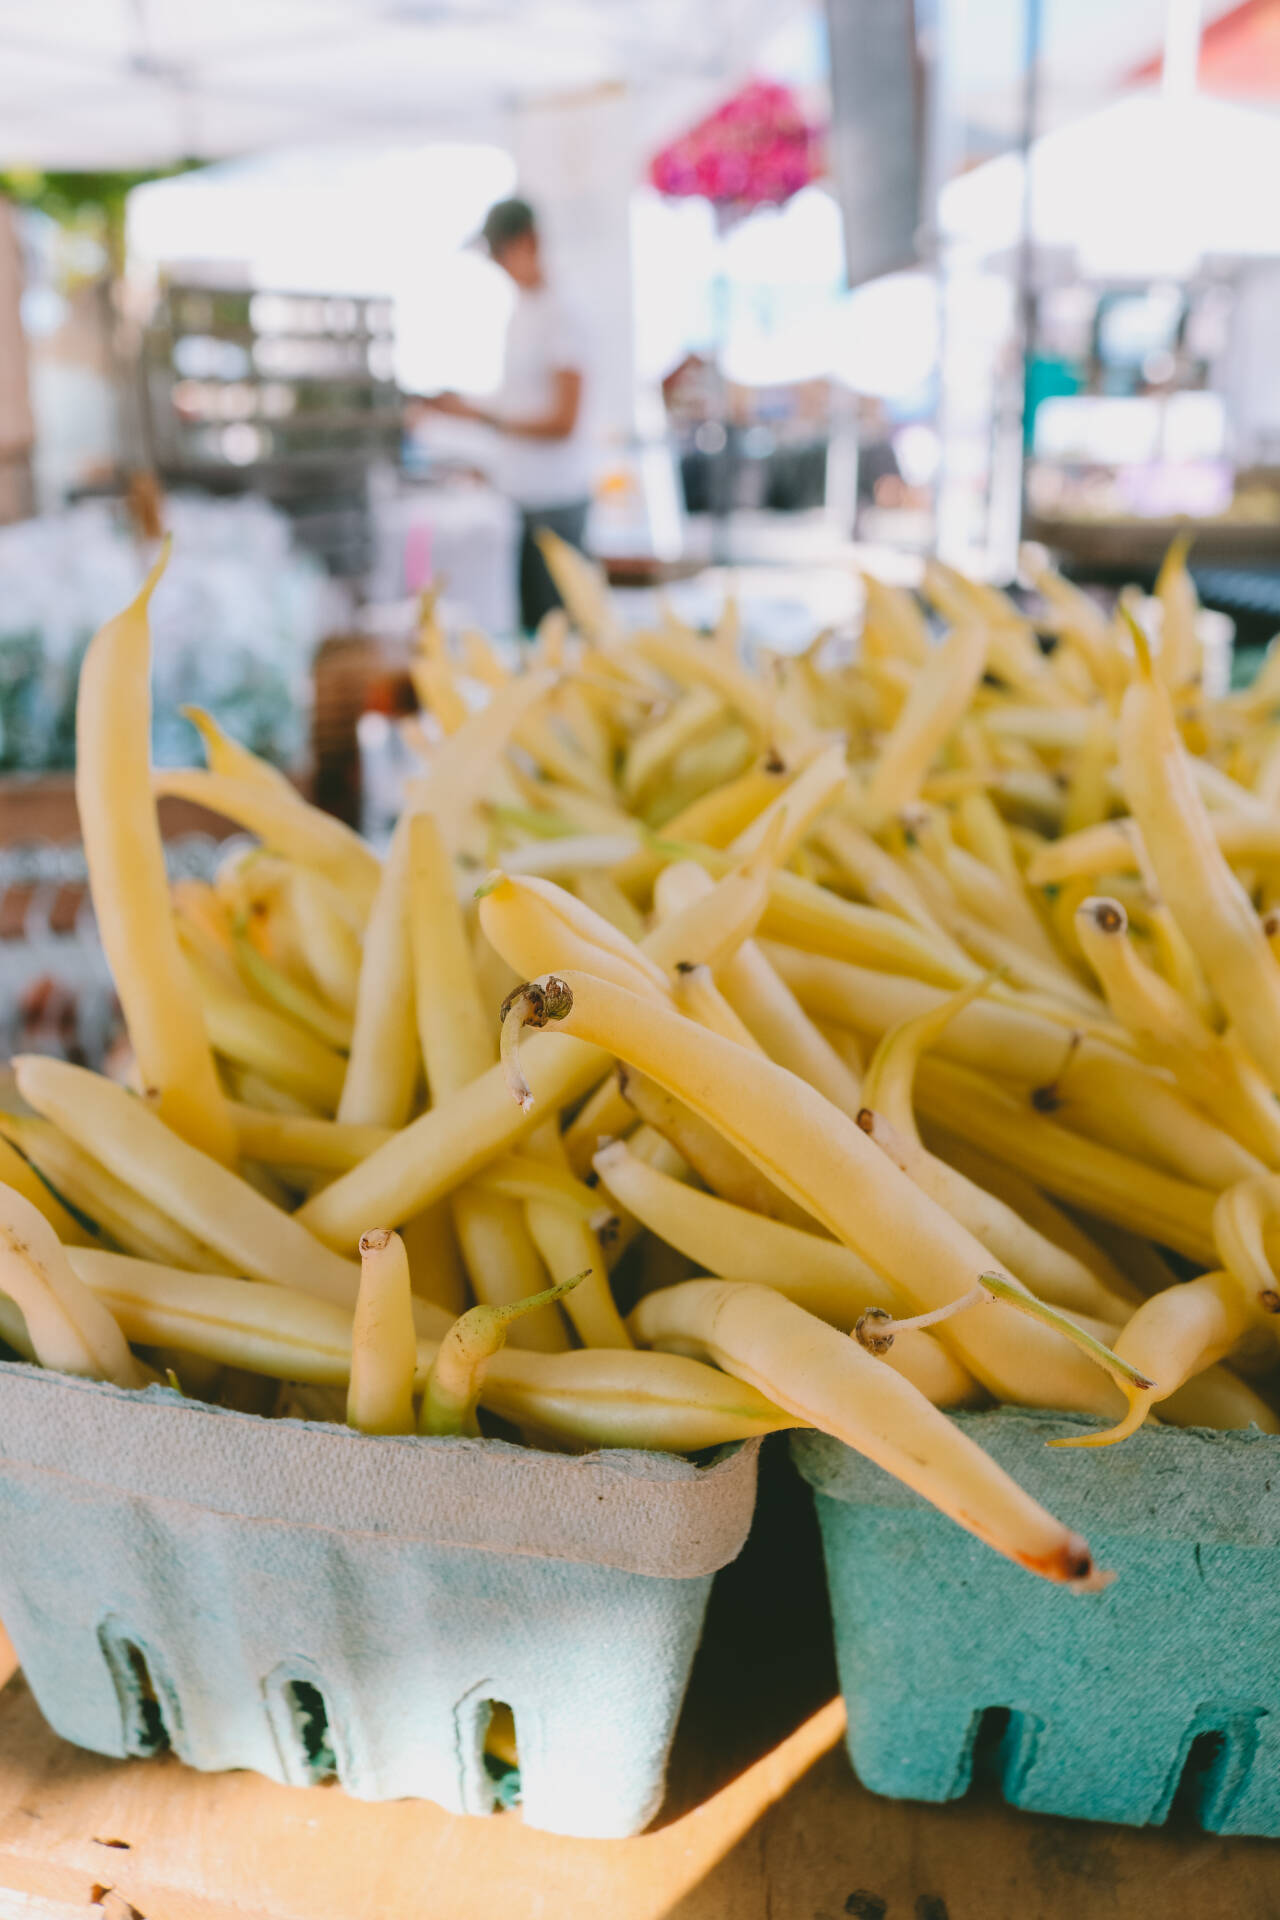 Photo by Bailey Loveless/SFAM
Wax beans a banana-colored variety of green, uncommonly found in conventional grocery stores, but oh so delicious and available at Rhea Sunshine Farm’s booth.